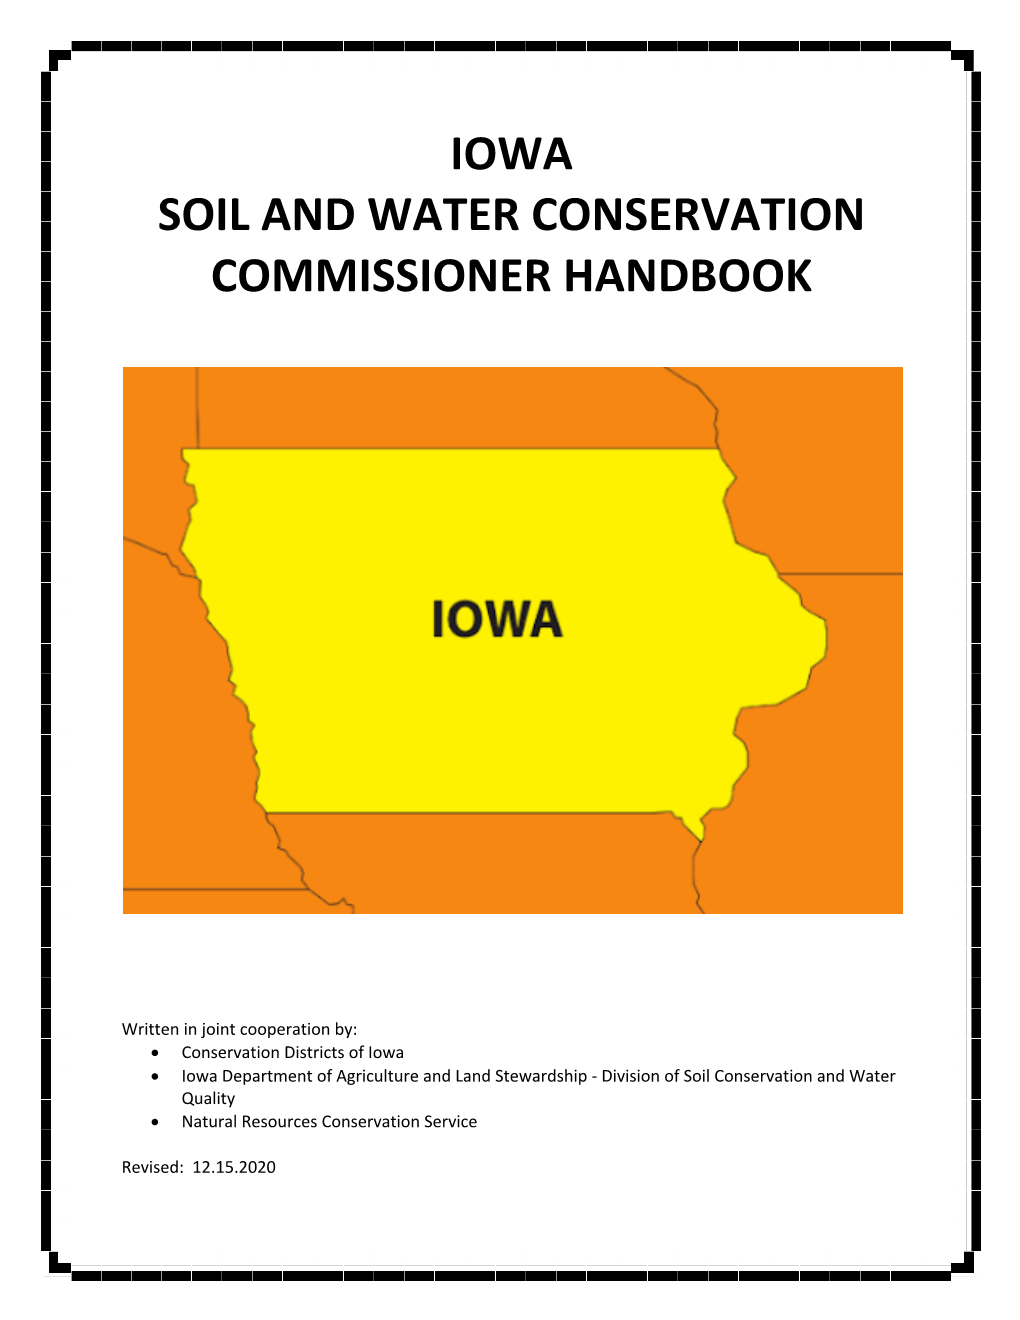 Iowa Soil and Water Conservation Commissioner Handbook